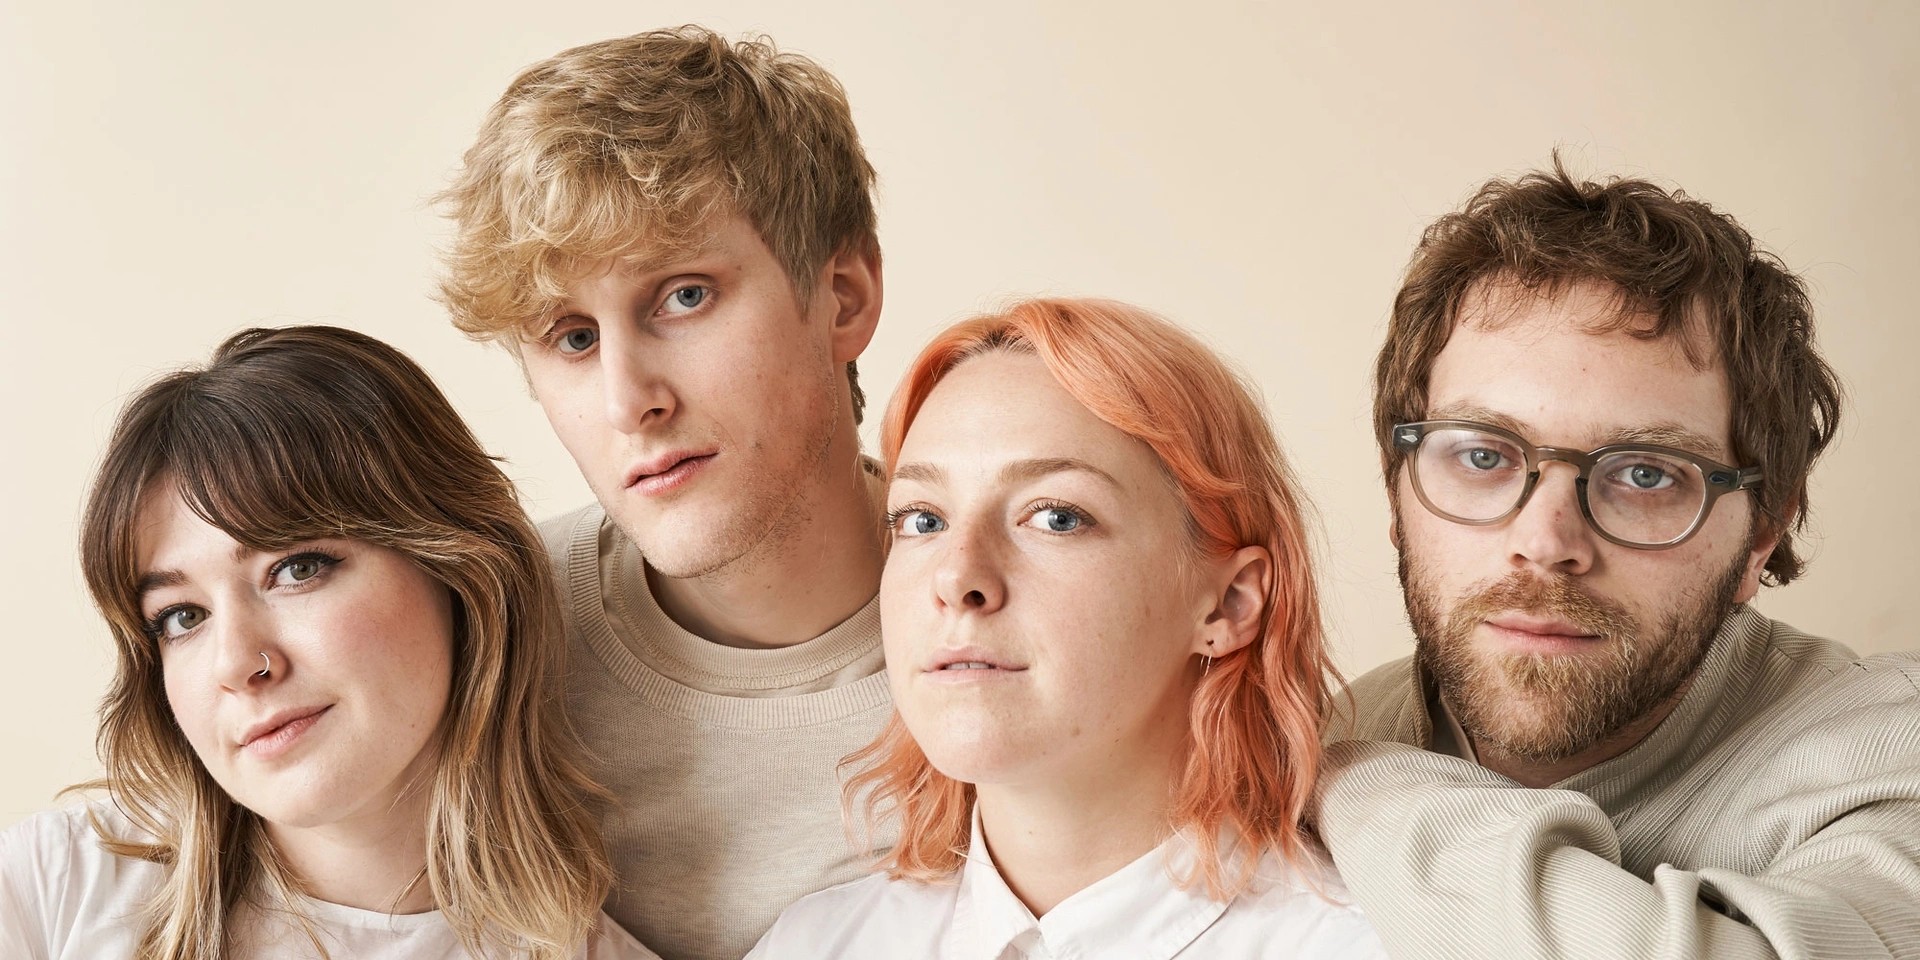 Yumi Zouma to perform in Tokyo and Seoul this September